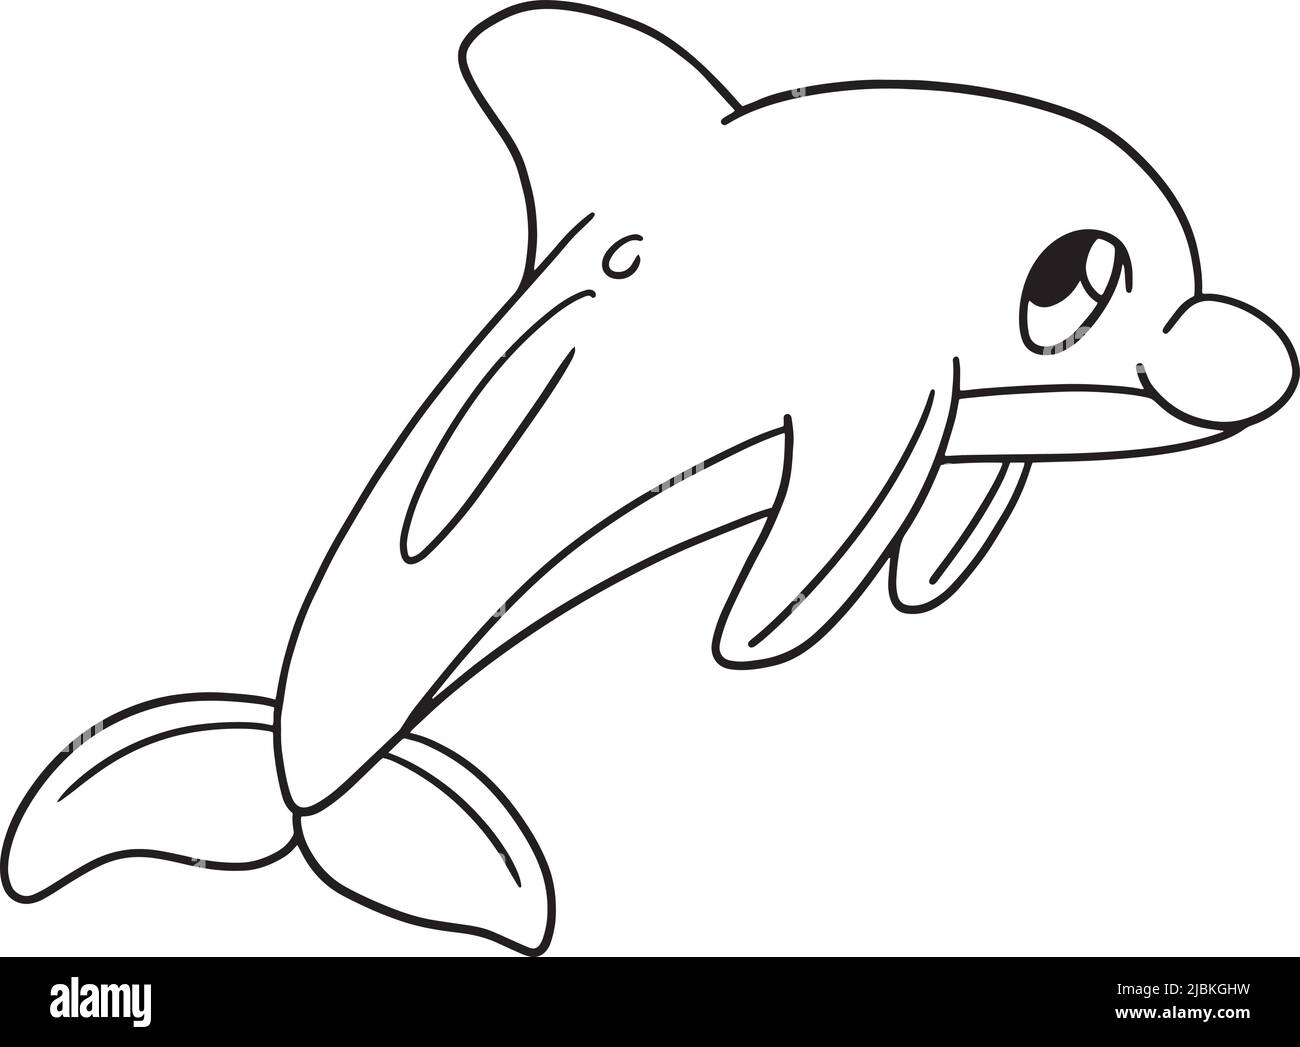 Dolphin coloring book page black and white stock photos images